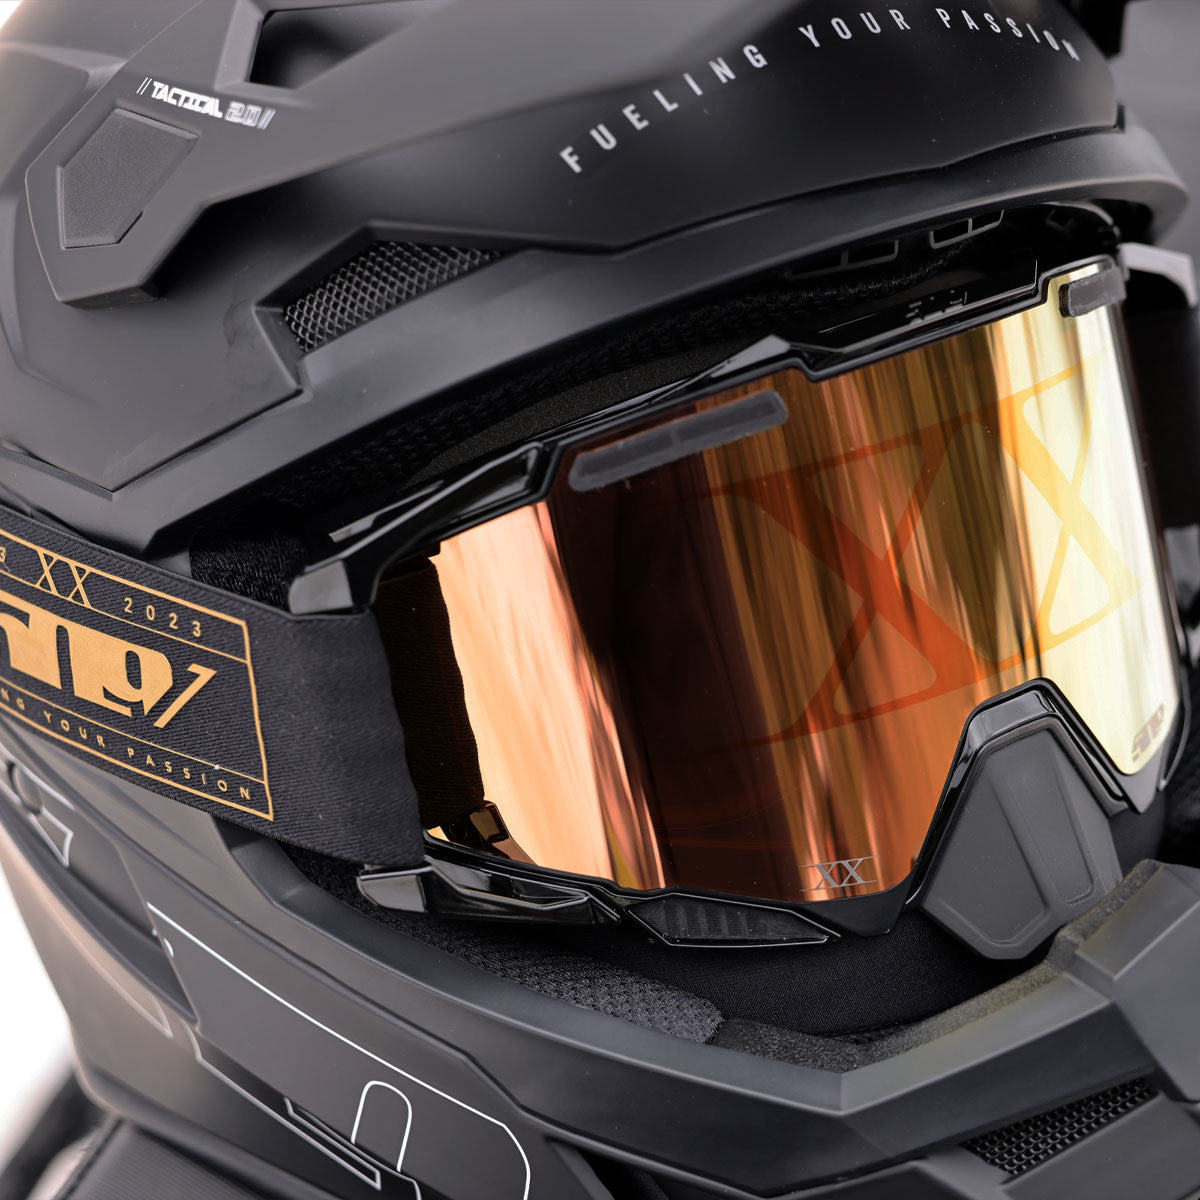 Sinister X7 Goggle